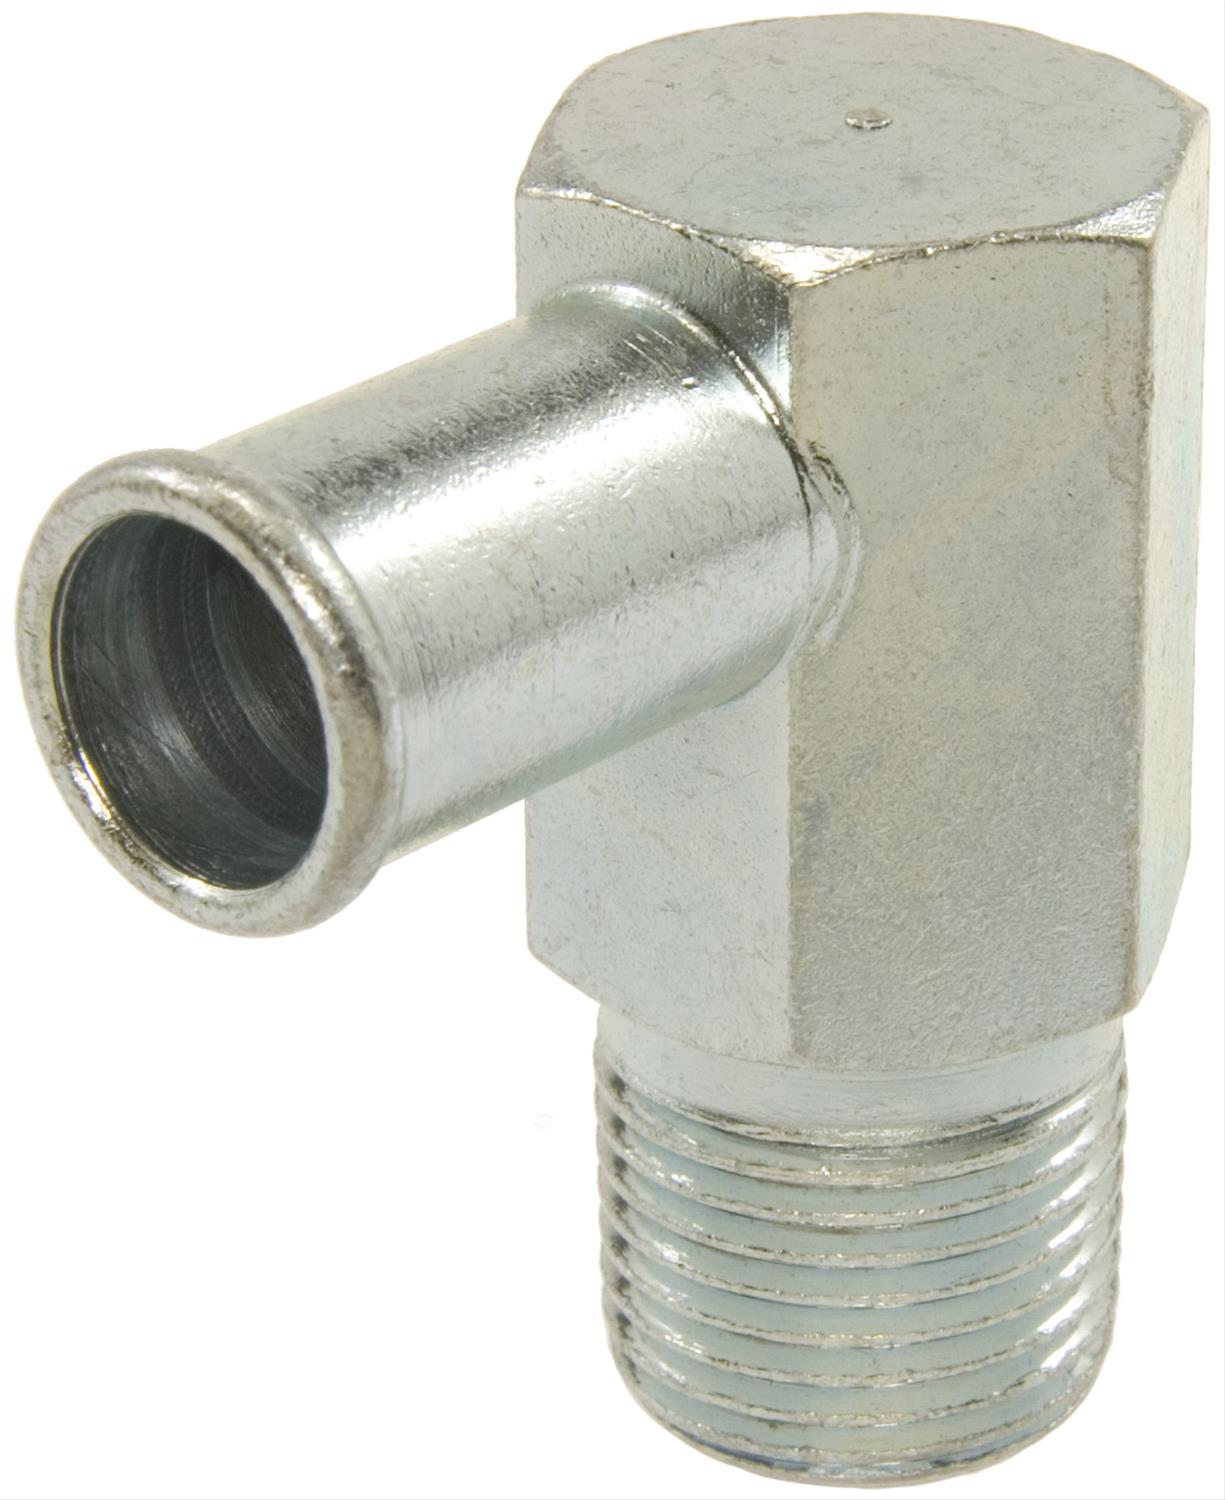 Heater Hose Connector 90 Degree Elbow Fitting Steel 5/8 inch Nipple 1/2 inch NPT